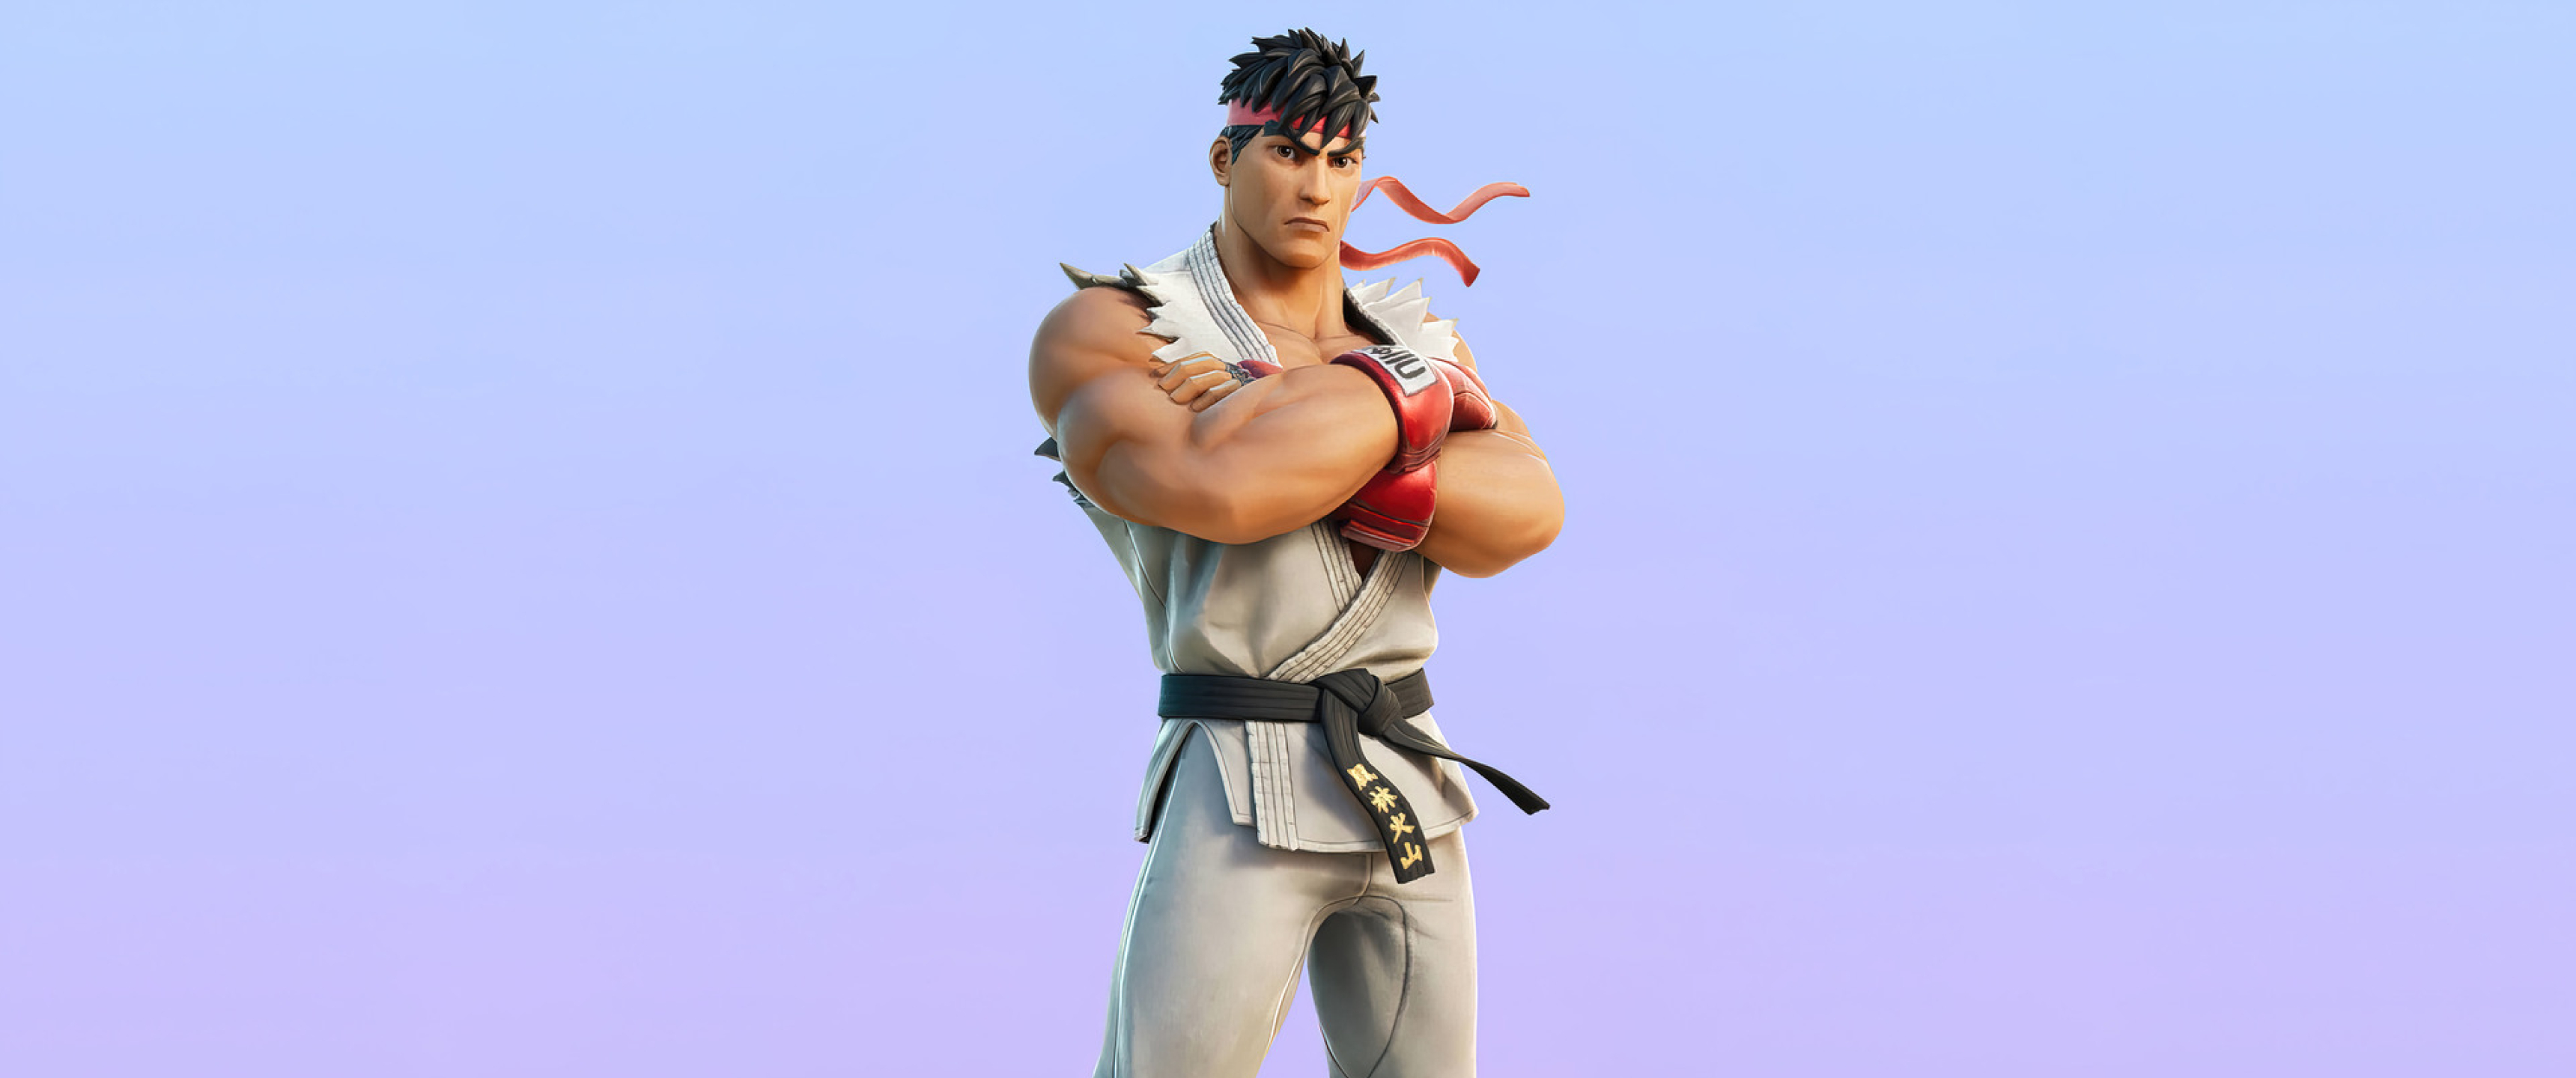 3440x1440 Ryu Outfit Skin Fortnite 3440x1440 Resolution Wallpaper Hd Games 4k Wallpapers 